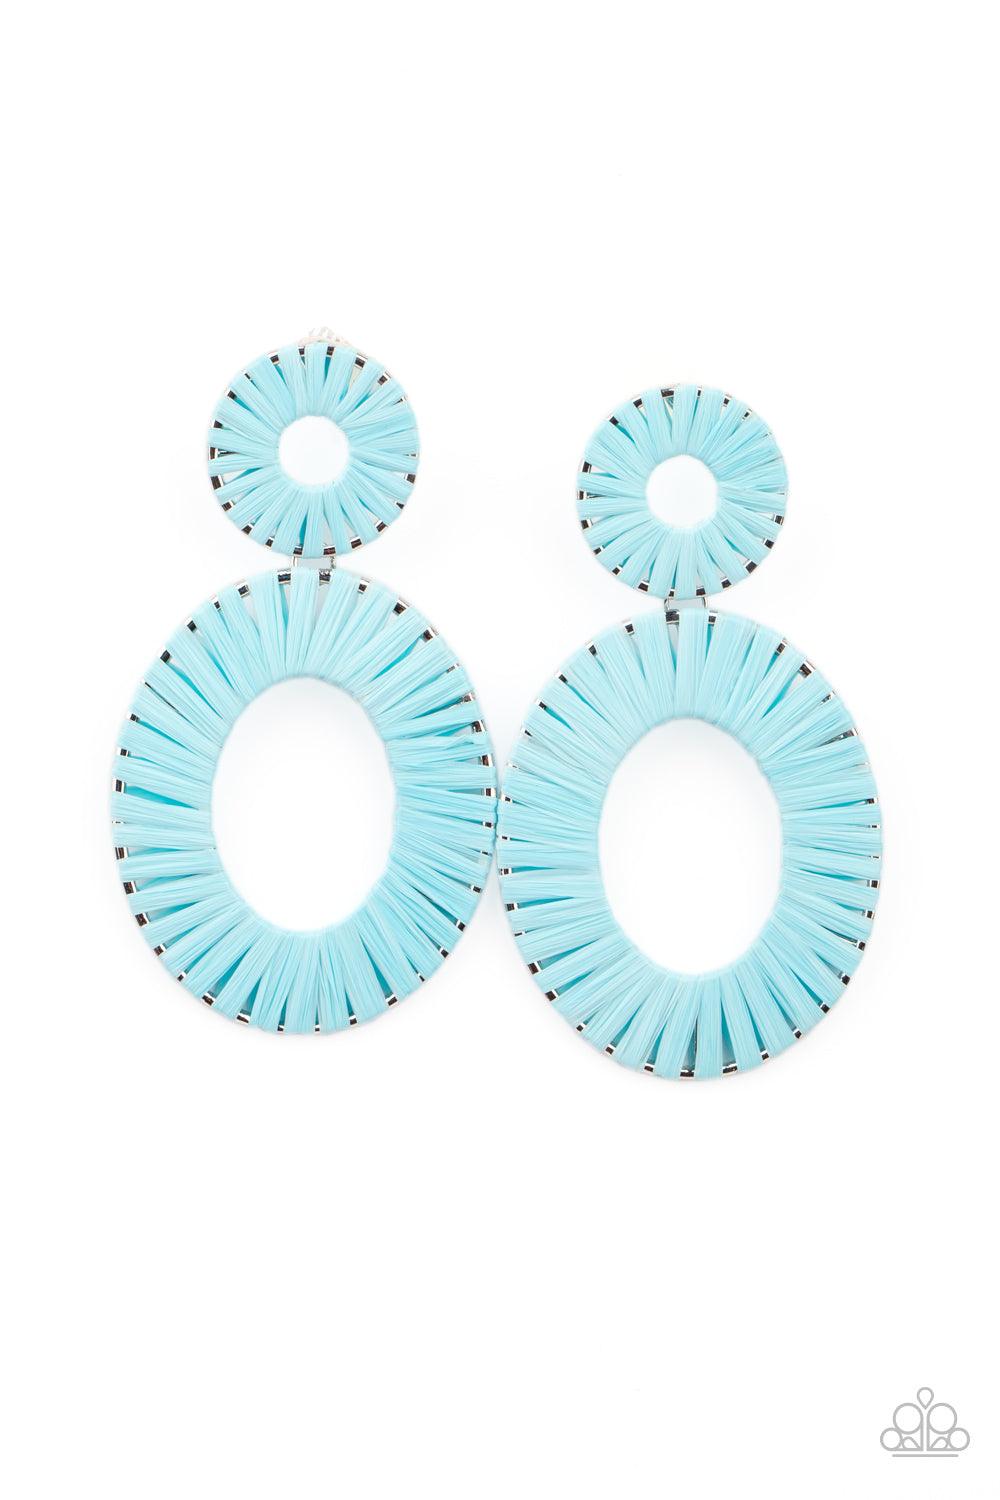 Paparazzi Accessories Foxy Flamenco - Blue Wicker-like Cerulean accents wrap around an oversized silver oval and dainty circular frame, linking into a colorful lure. Earring attaches to a standard post fitting. Sold as one pair of post earrings. Earrings